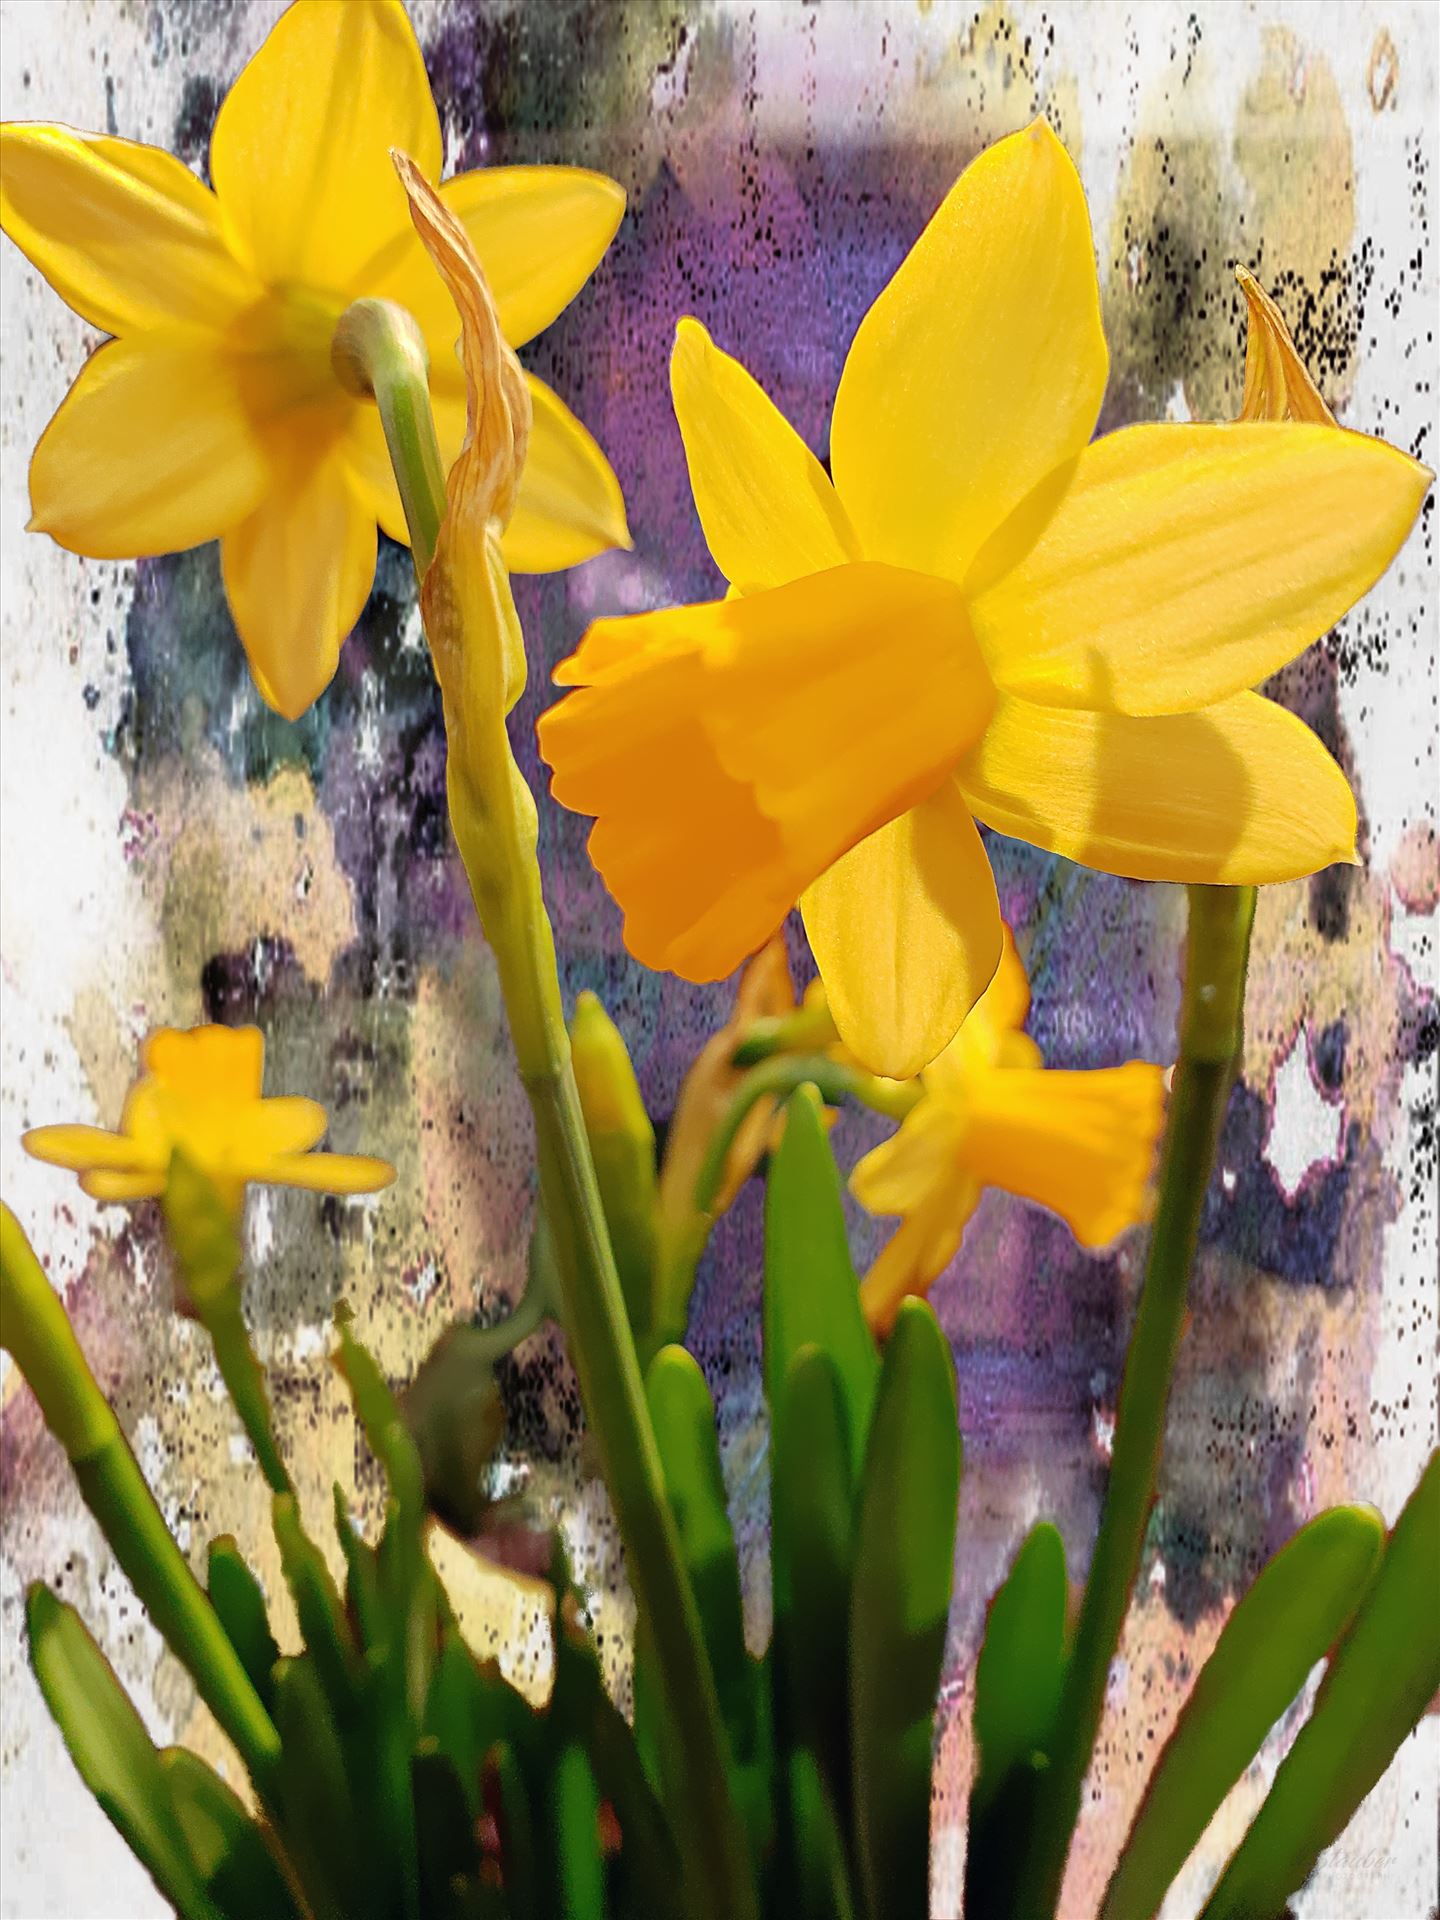 Daffodils -  by CLStauber Photography